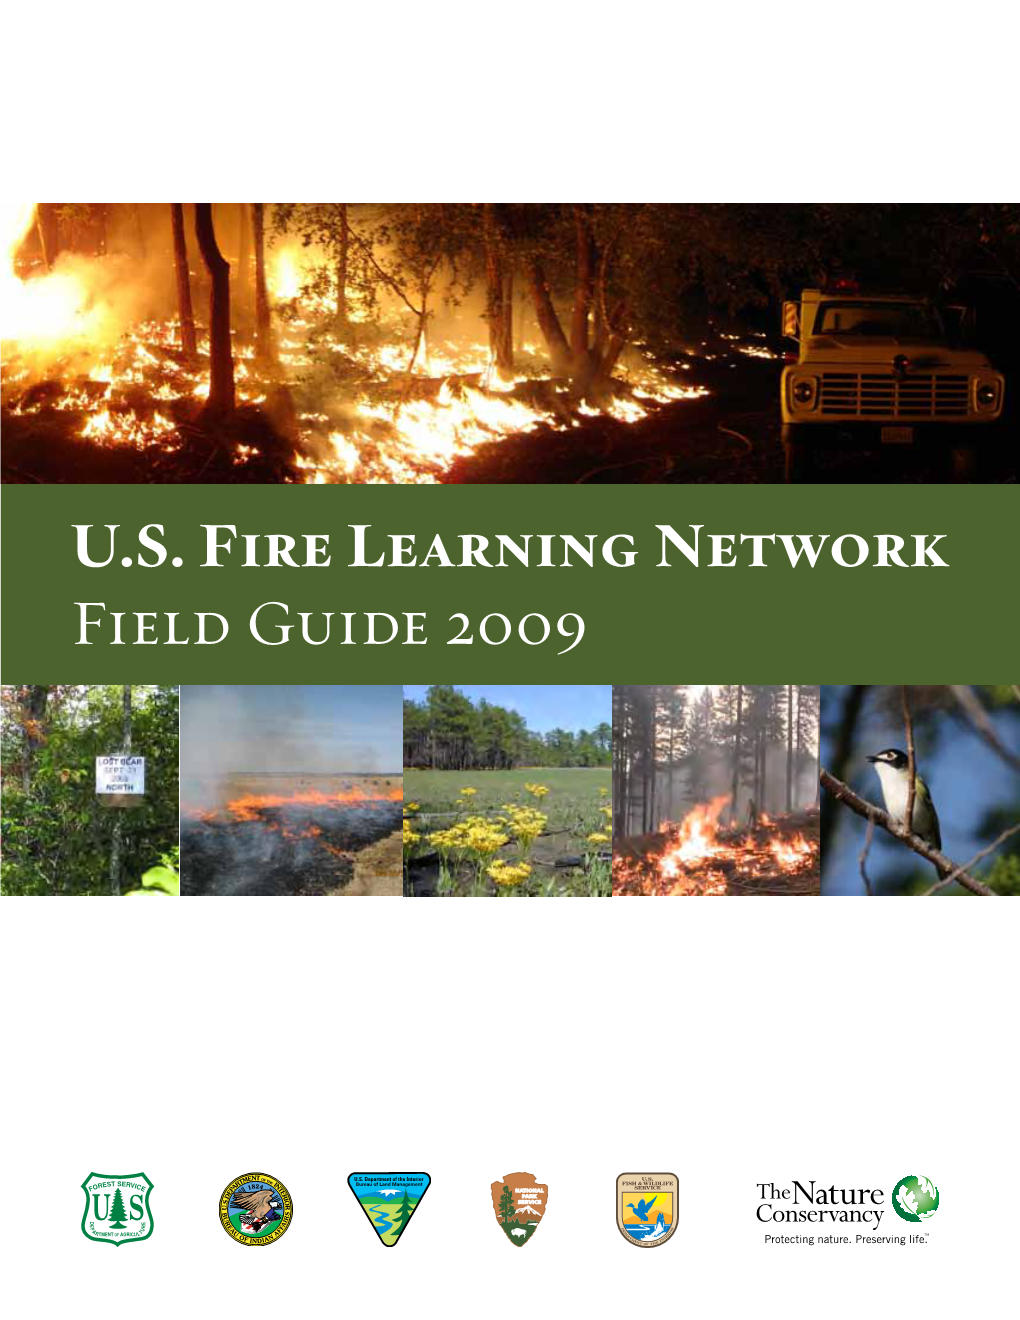 U.S. Fire Learning Network Field Guide 2009 Copyright 2009 the Nature Conservancy